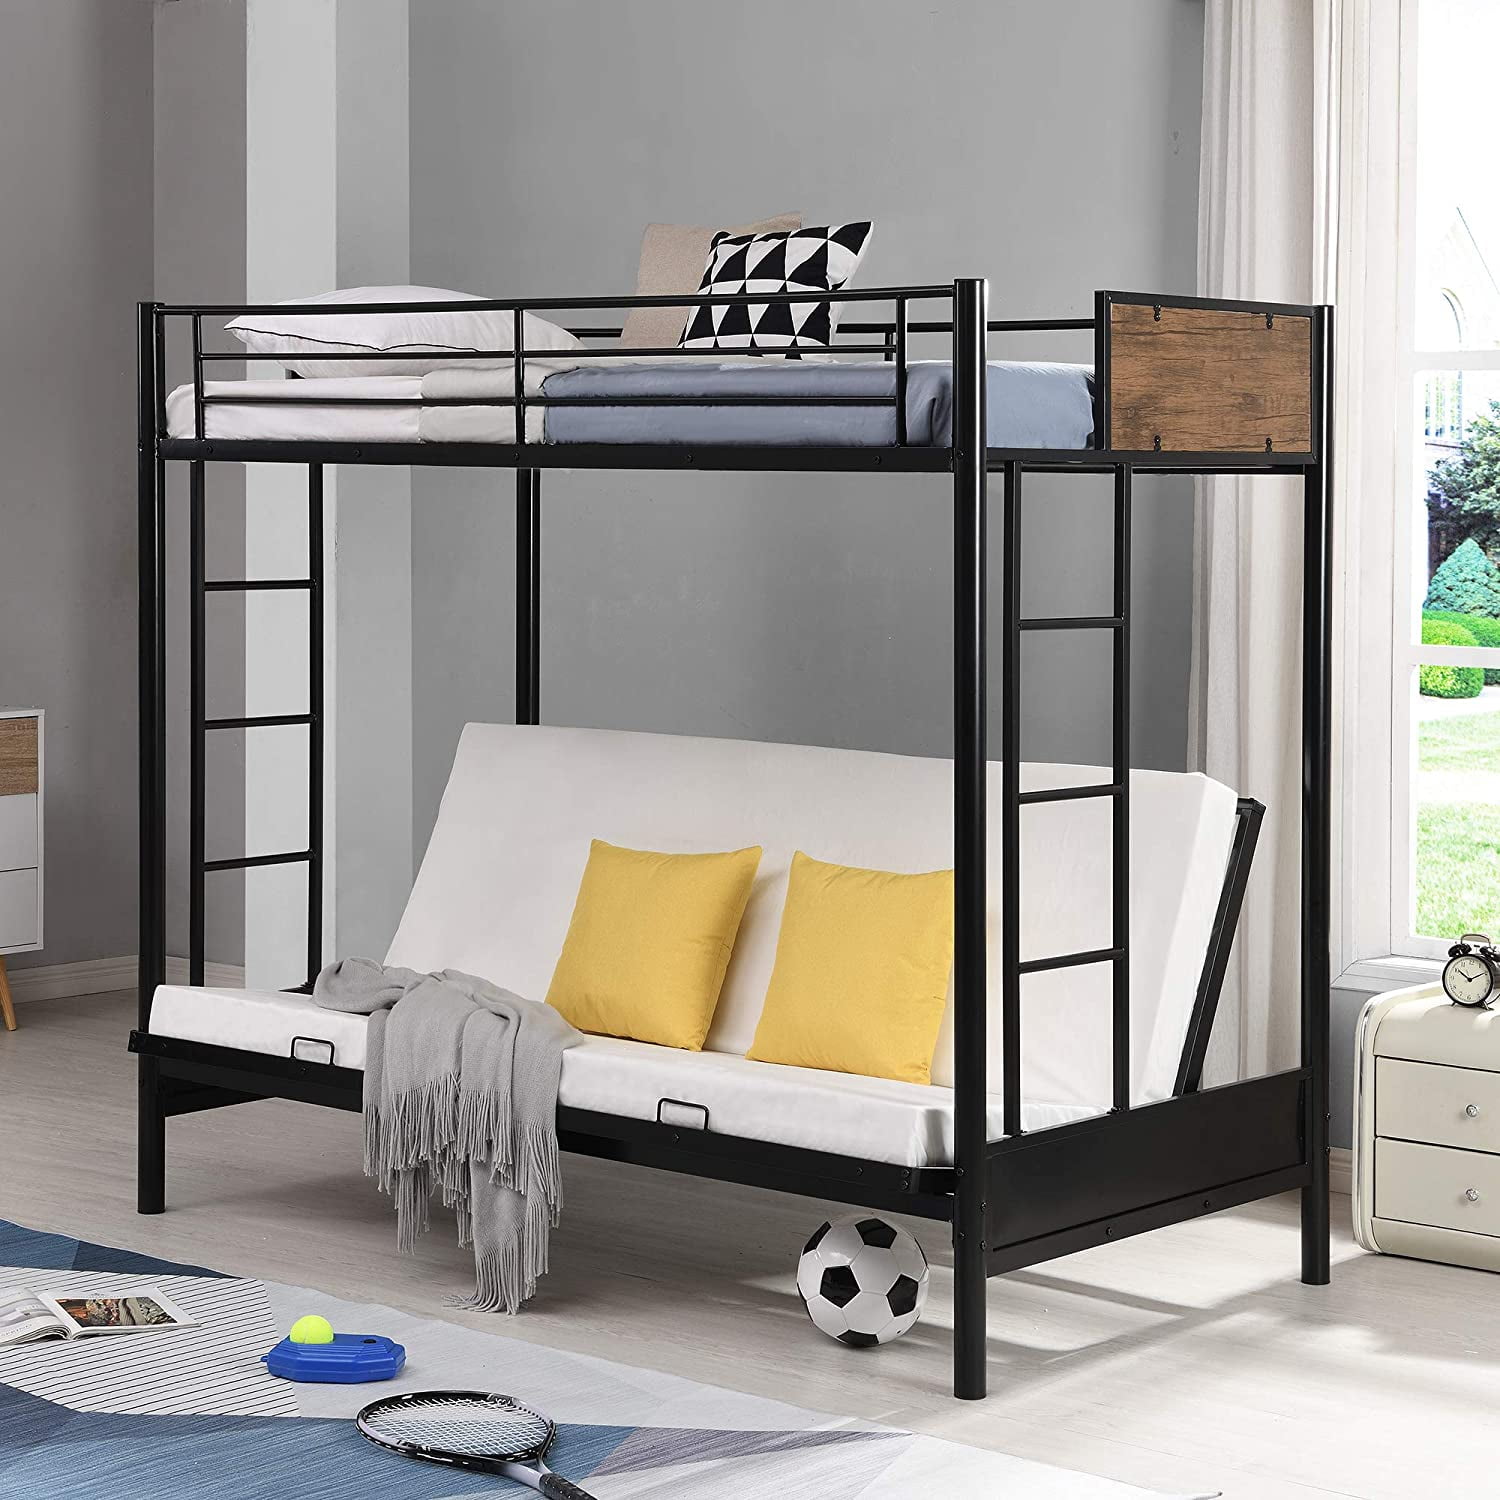 Piscis Convertible Twin Over Futon Bed, Full Size Bunk Bed With Futon On Bottom